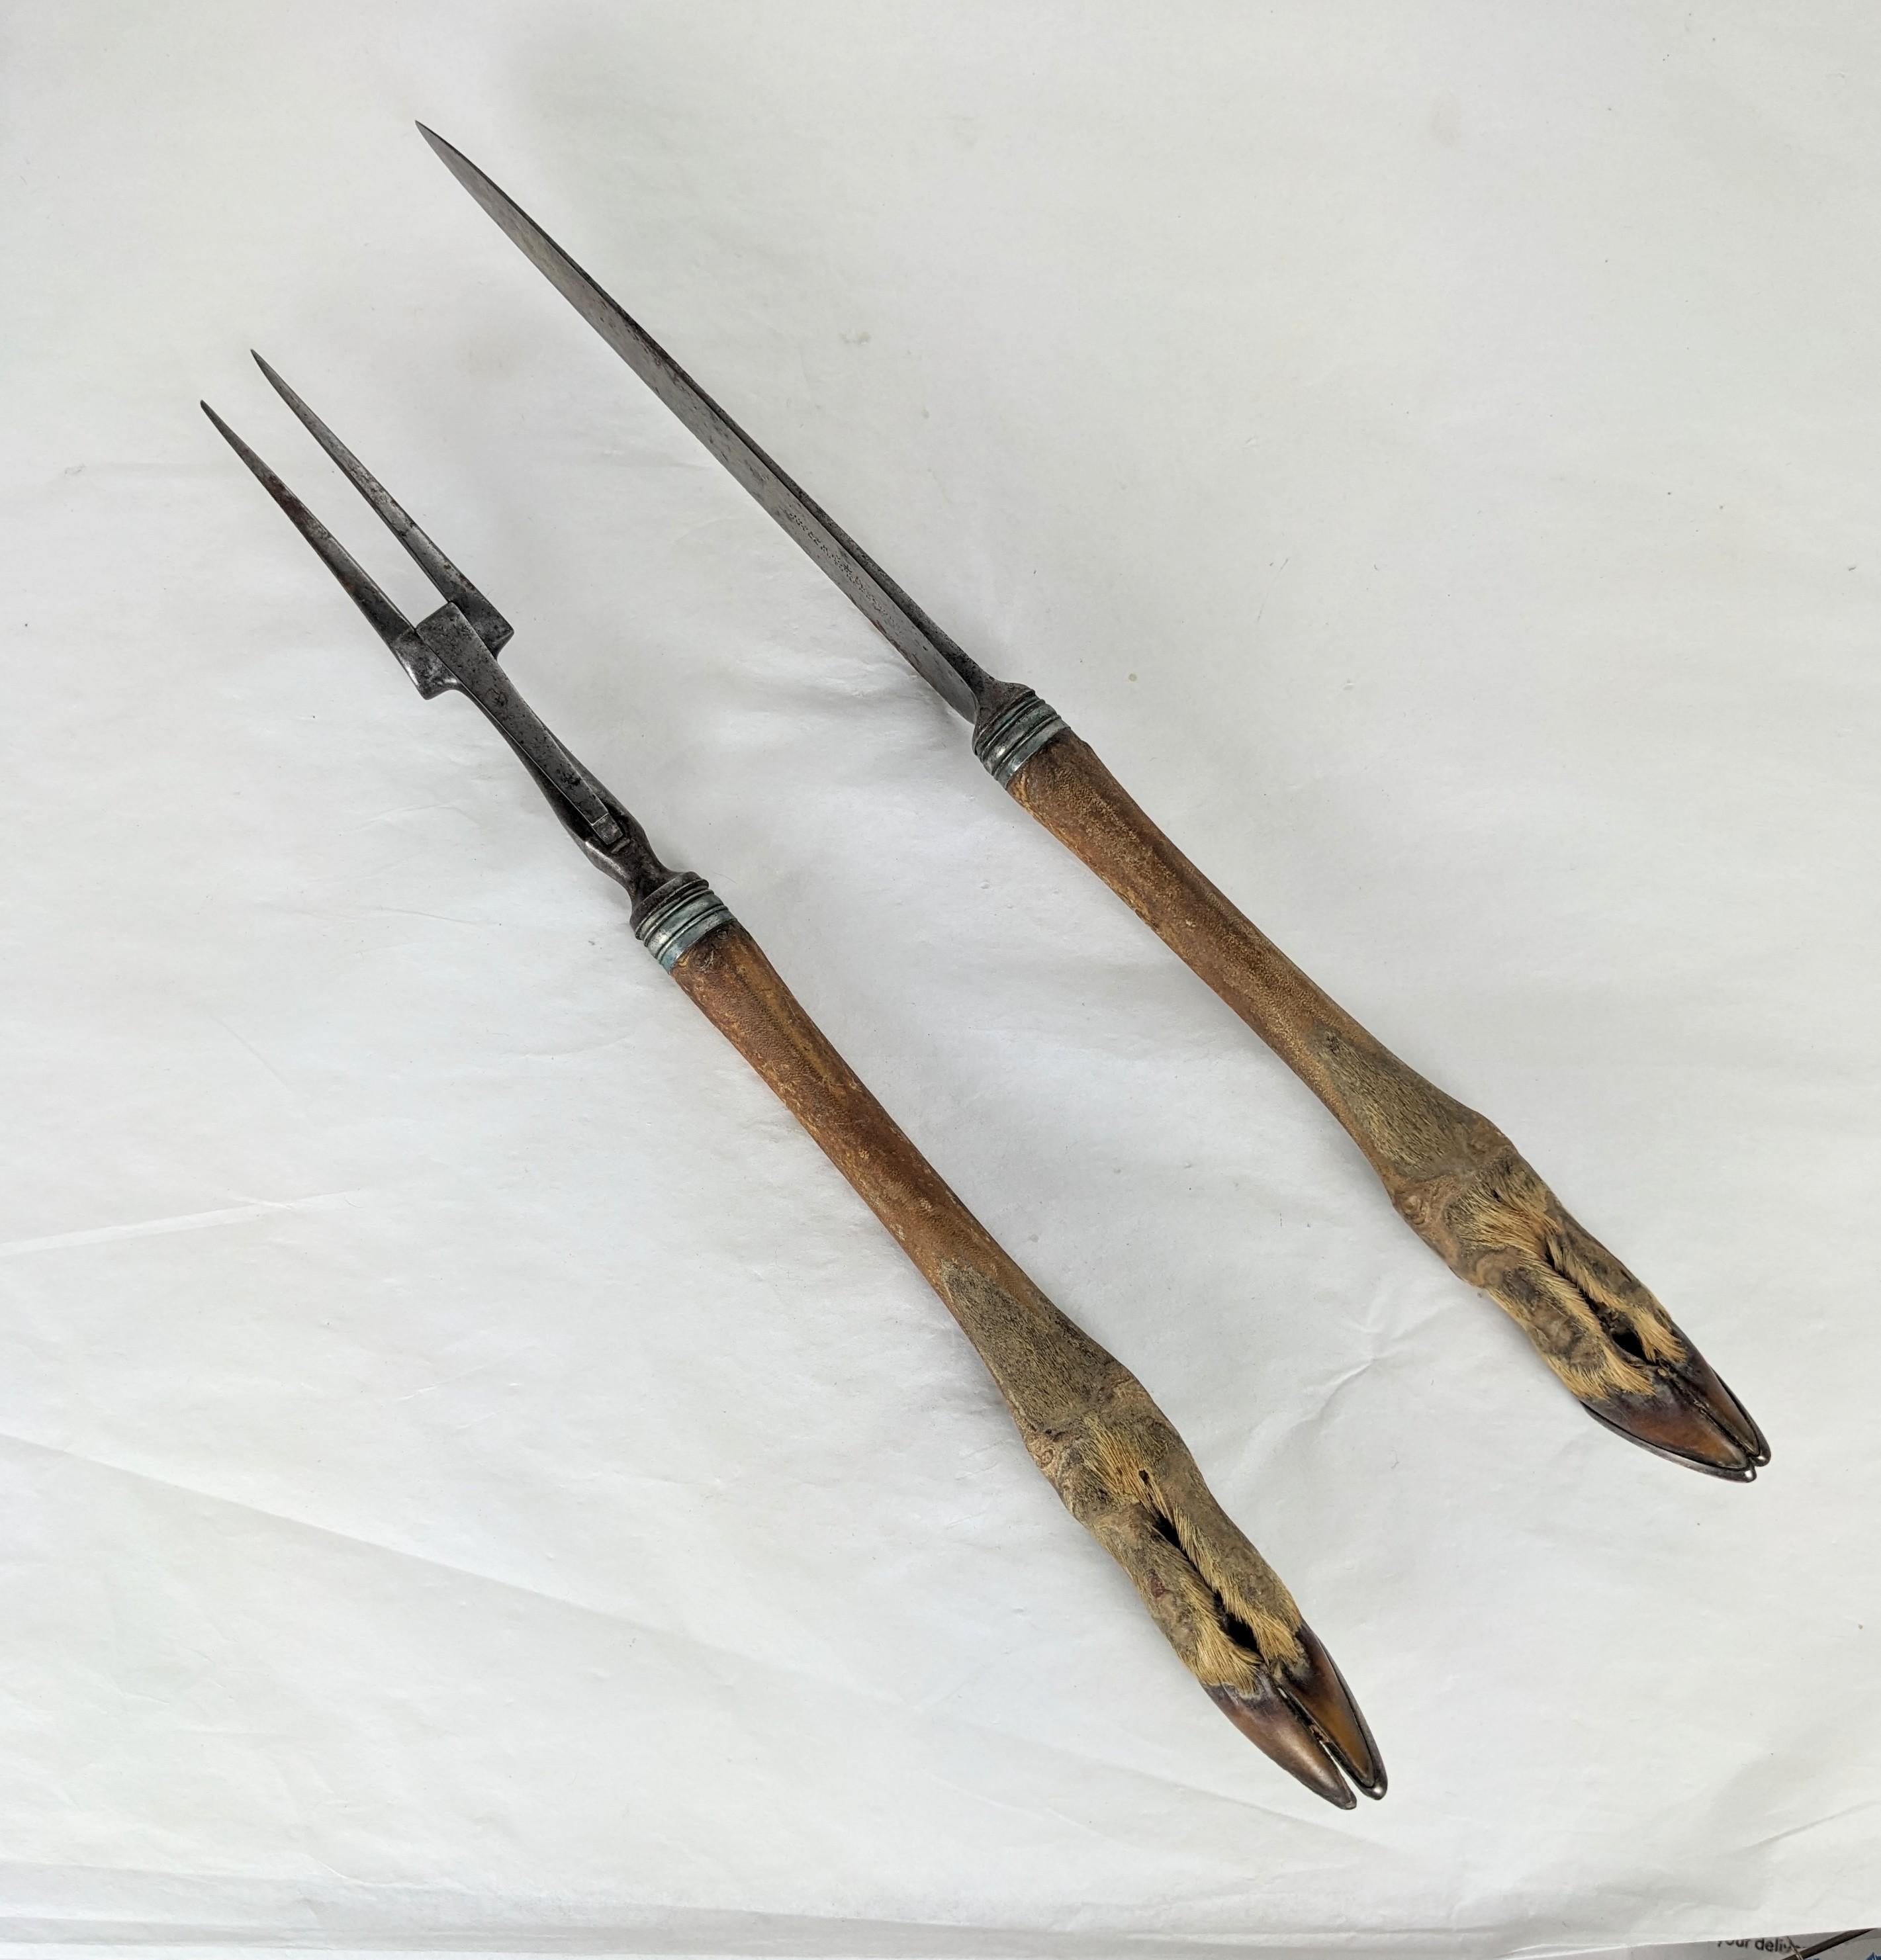 Unusual Victorian Figural Carving Set with deer feet used as handles. Creepy cool utensils for cutting meat from the 19th C. English. 
Each 12.5 x 1